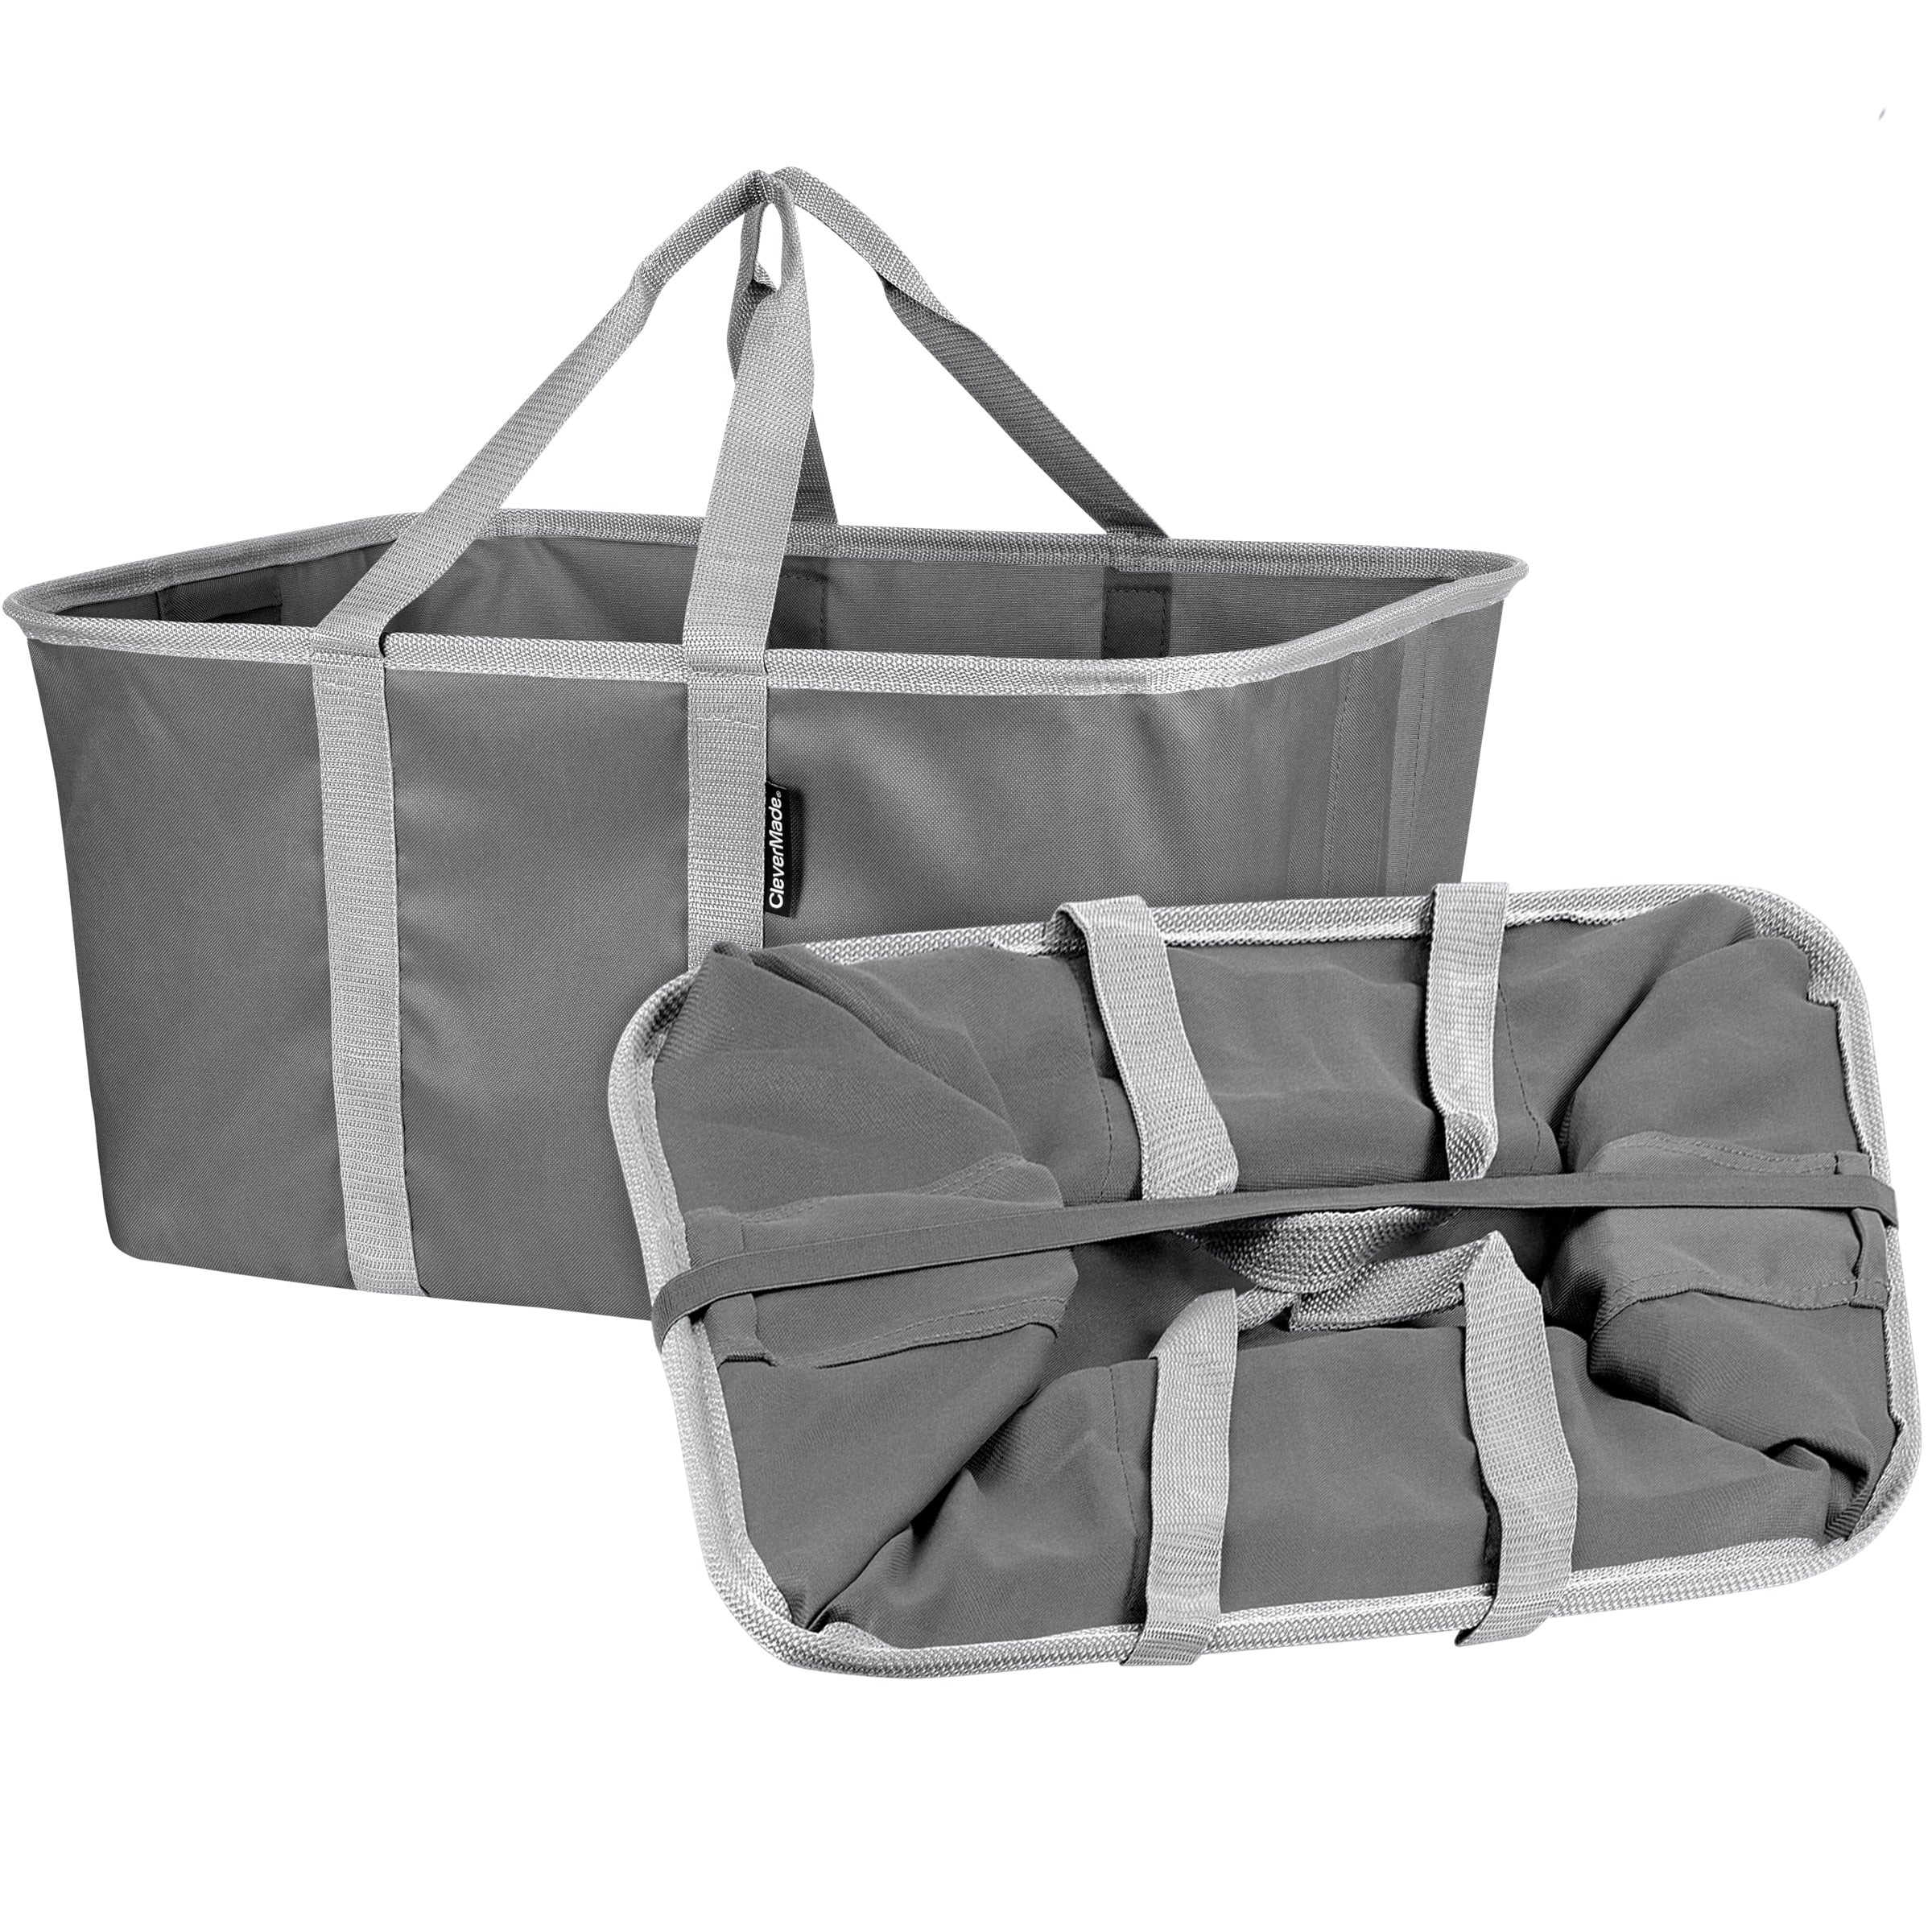 Costco! Clevermade Collapsible Laundry Basket 2 Pack $17 (Instant Savings  NOW $13). 